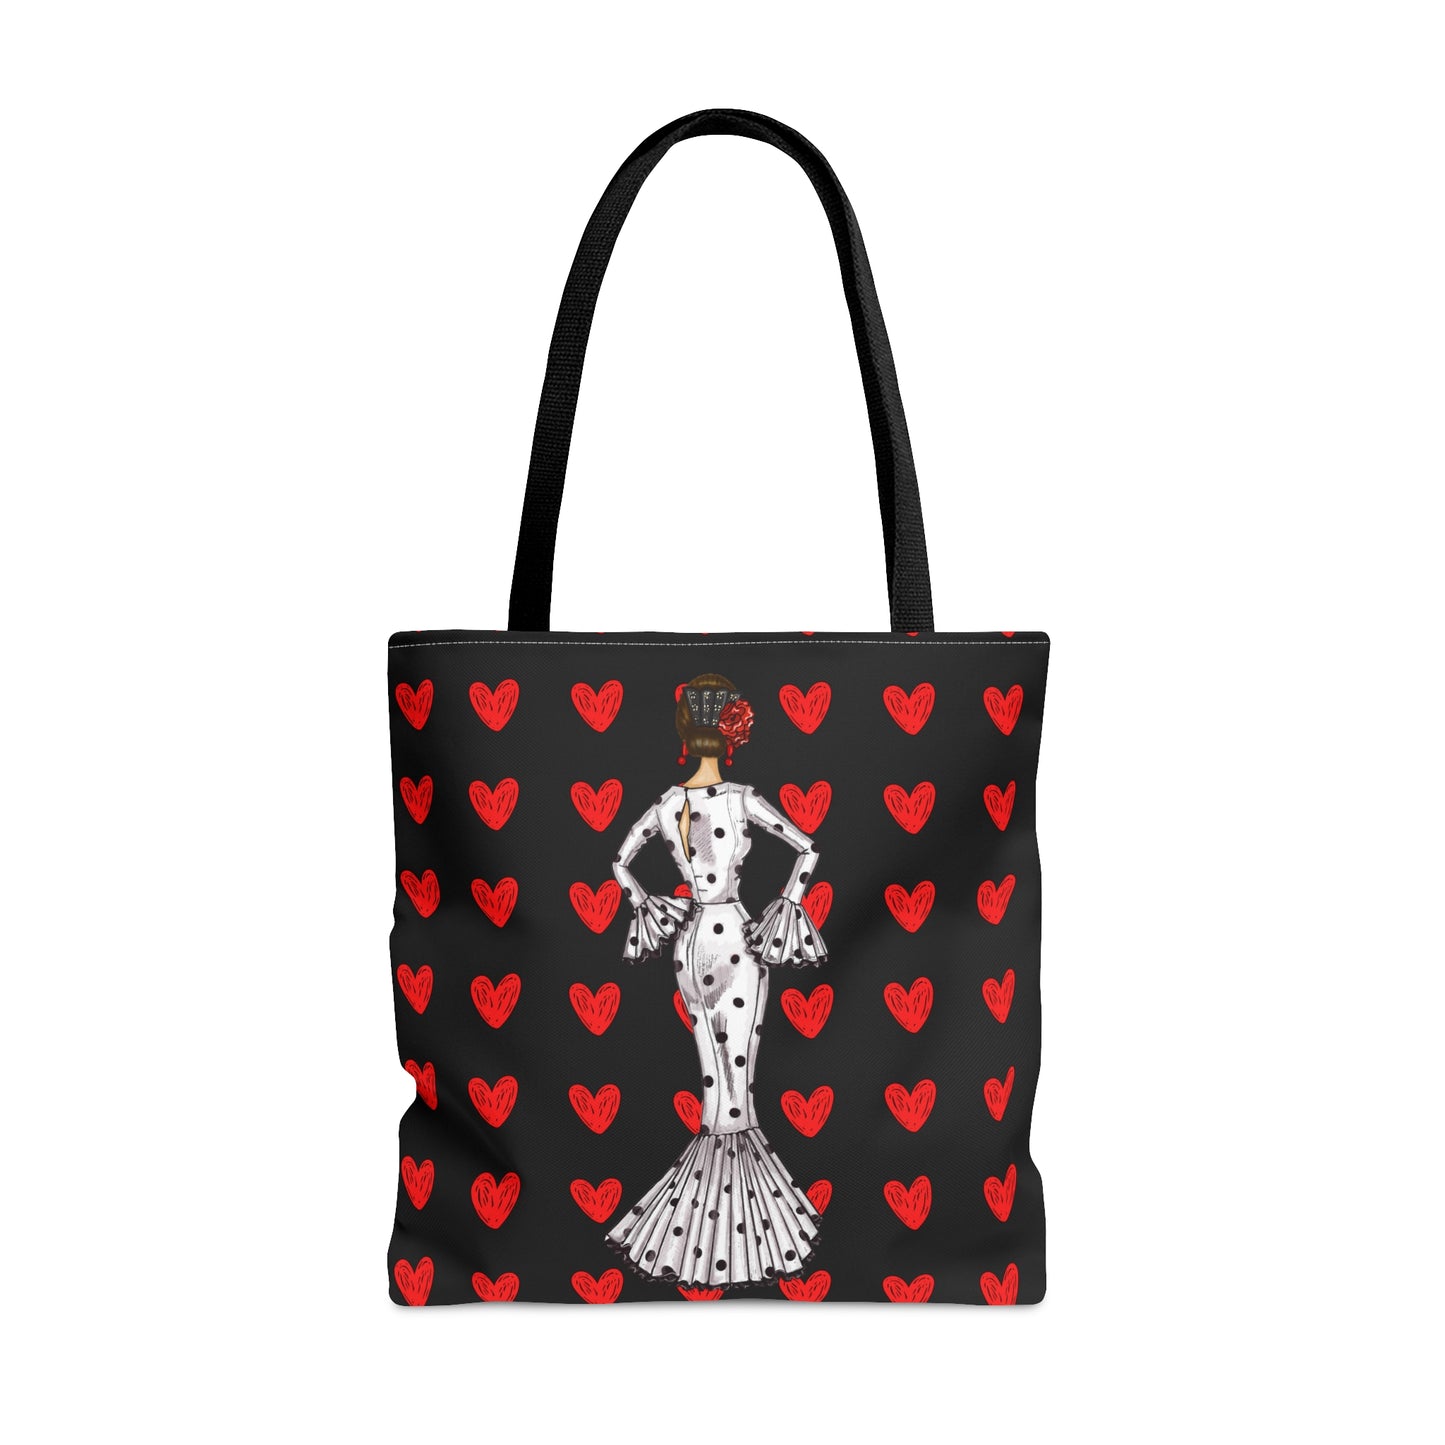 a black and red tote bag with a dalmatian dog on it